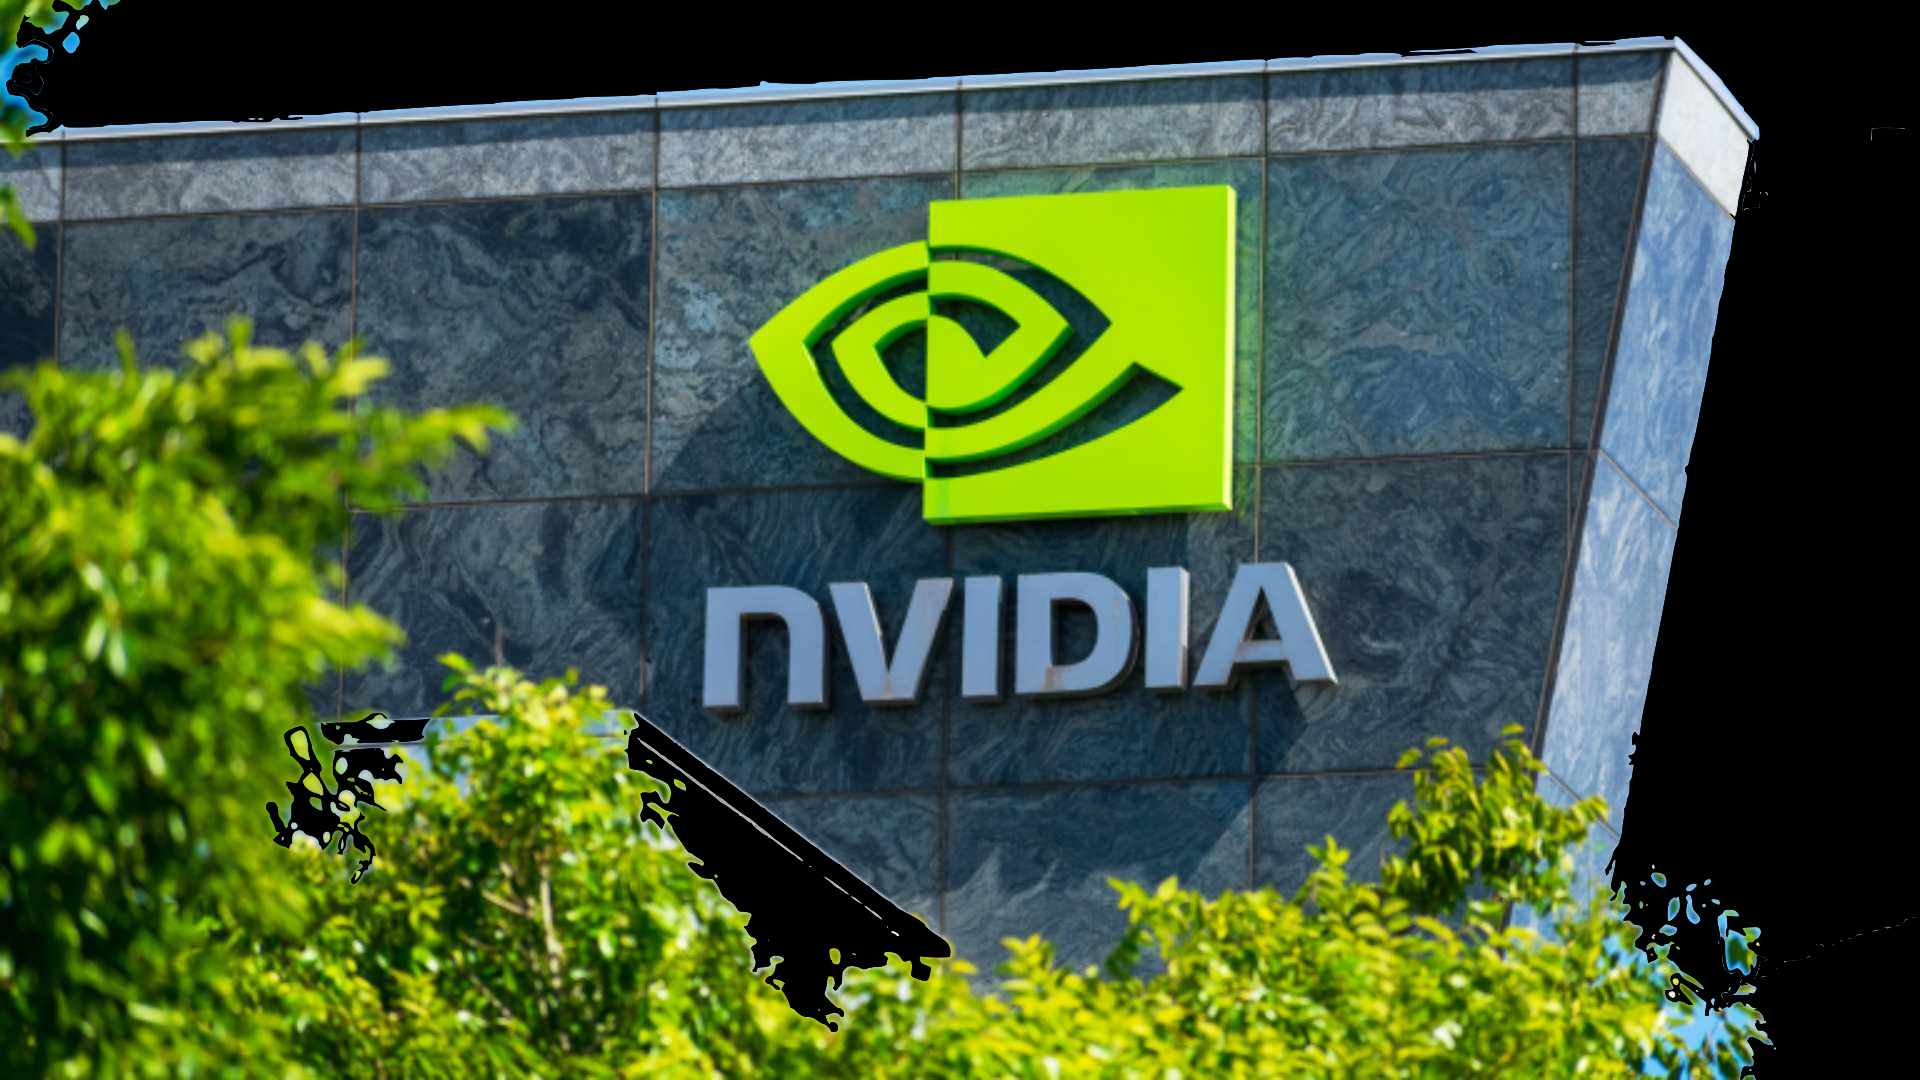 Cover Image for Should You Buy Nvidia? 5 Highlights from Price Forecast and Financial Projections